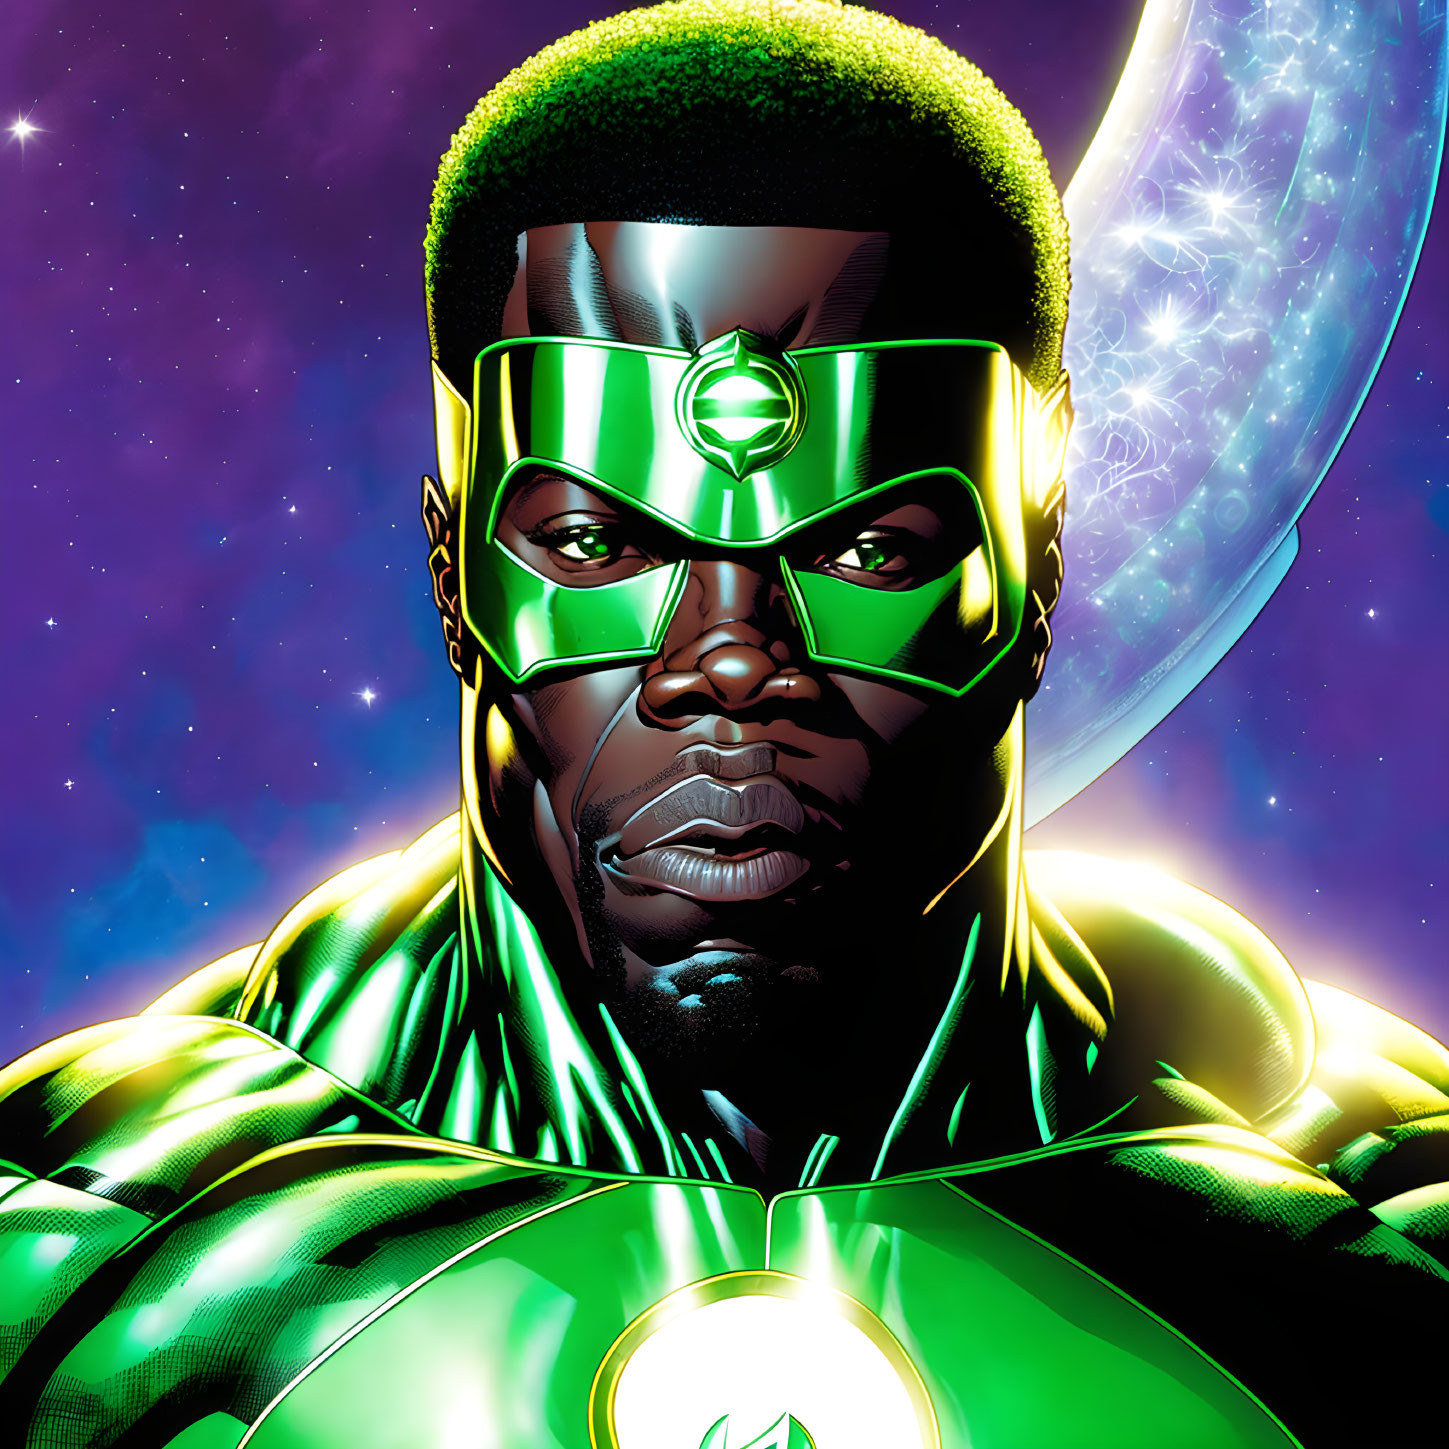 Superhero in Green and Black Suit with Glowing Power Ring on Cosmic Background